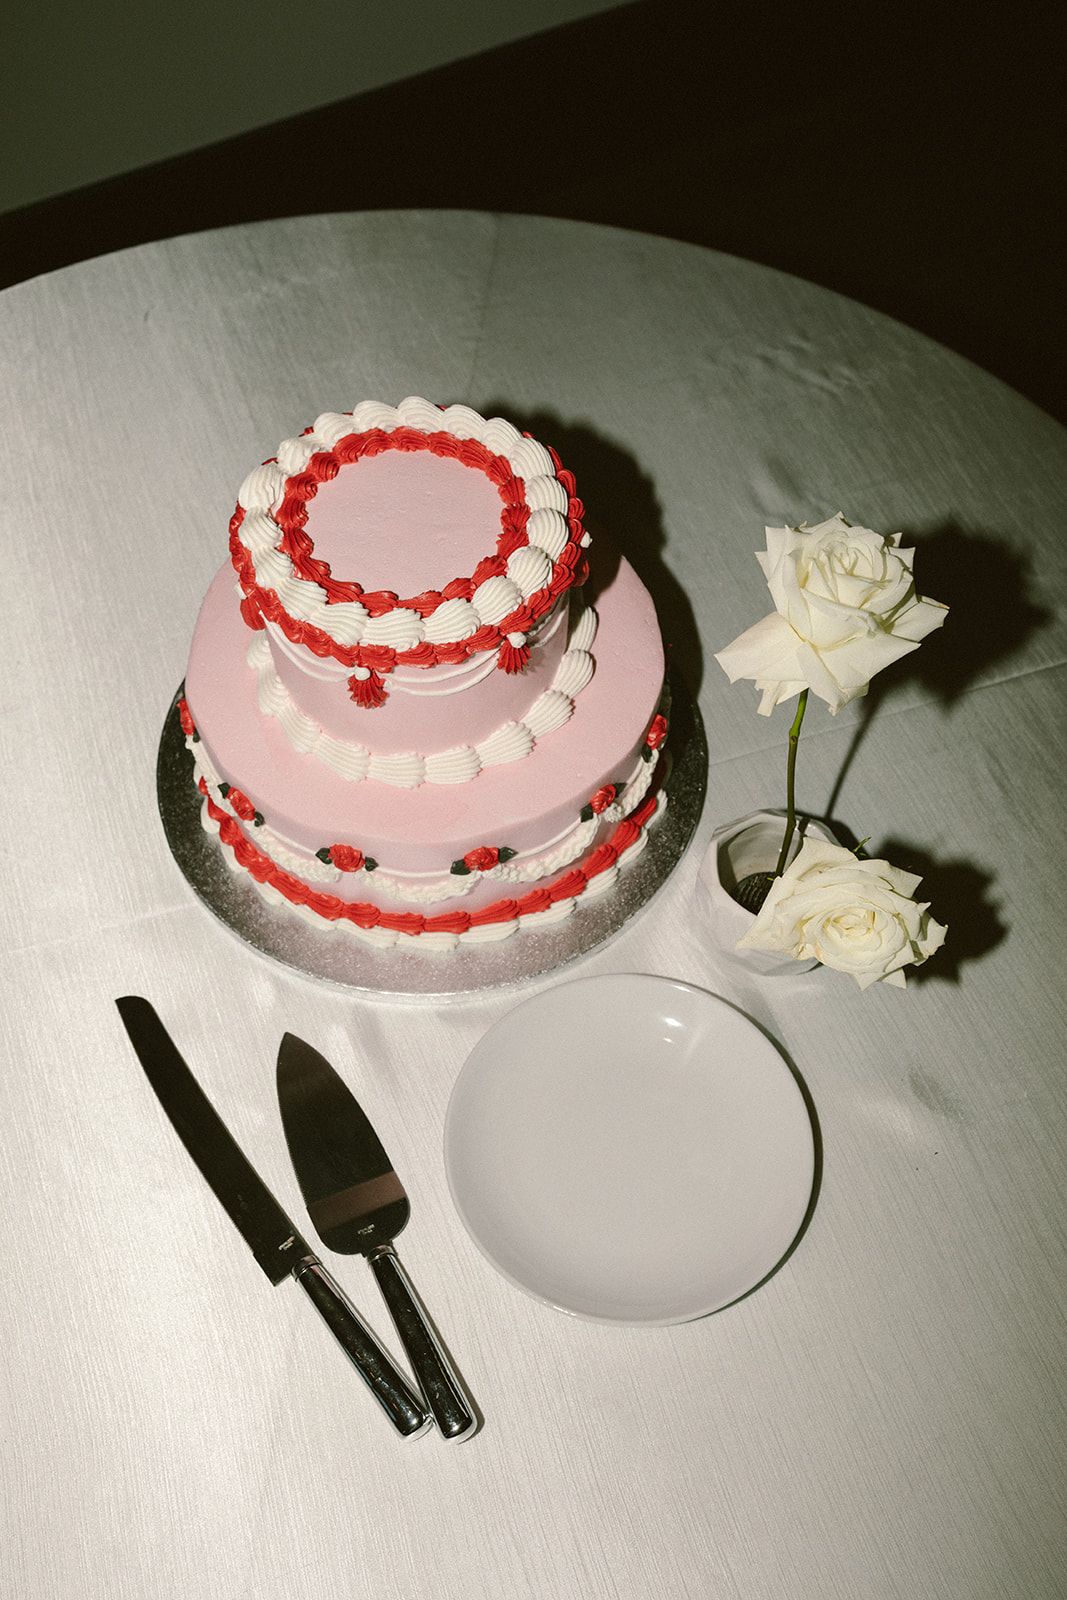 Retro Pink and Red Wedding Cake